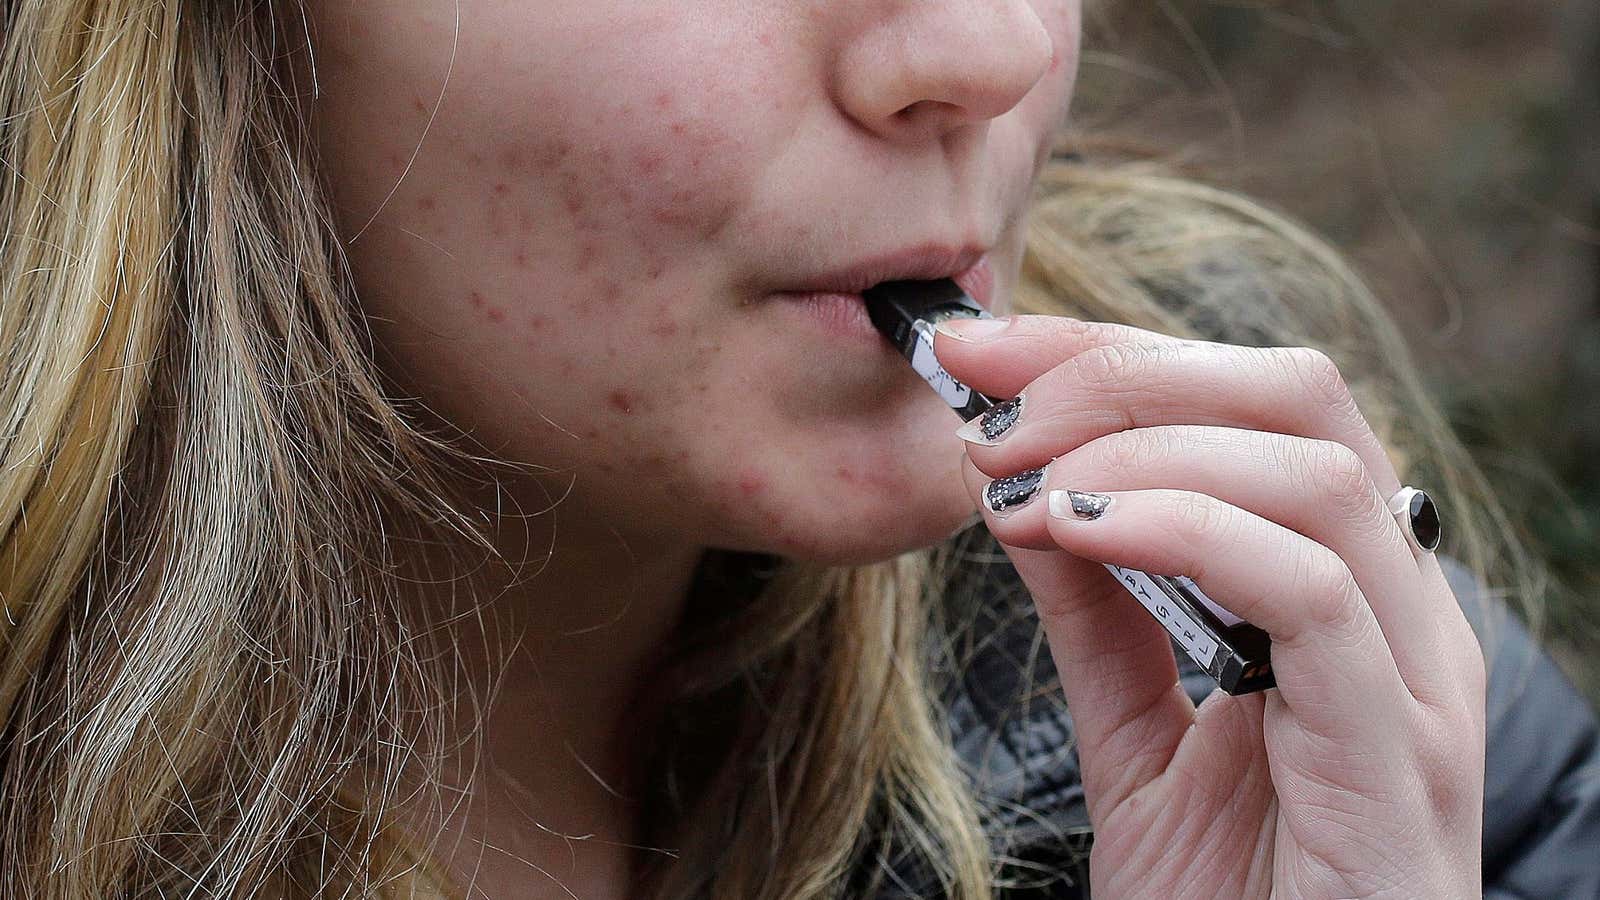 Juul is riding its popularity with teens into a $15 billion valuation.